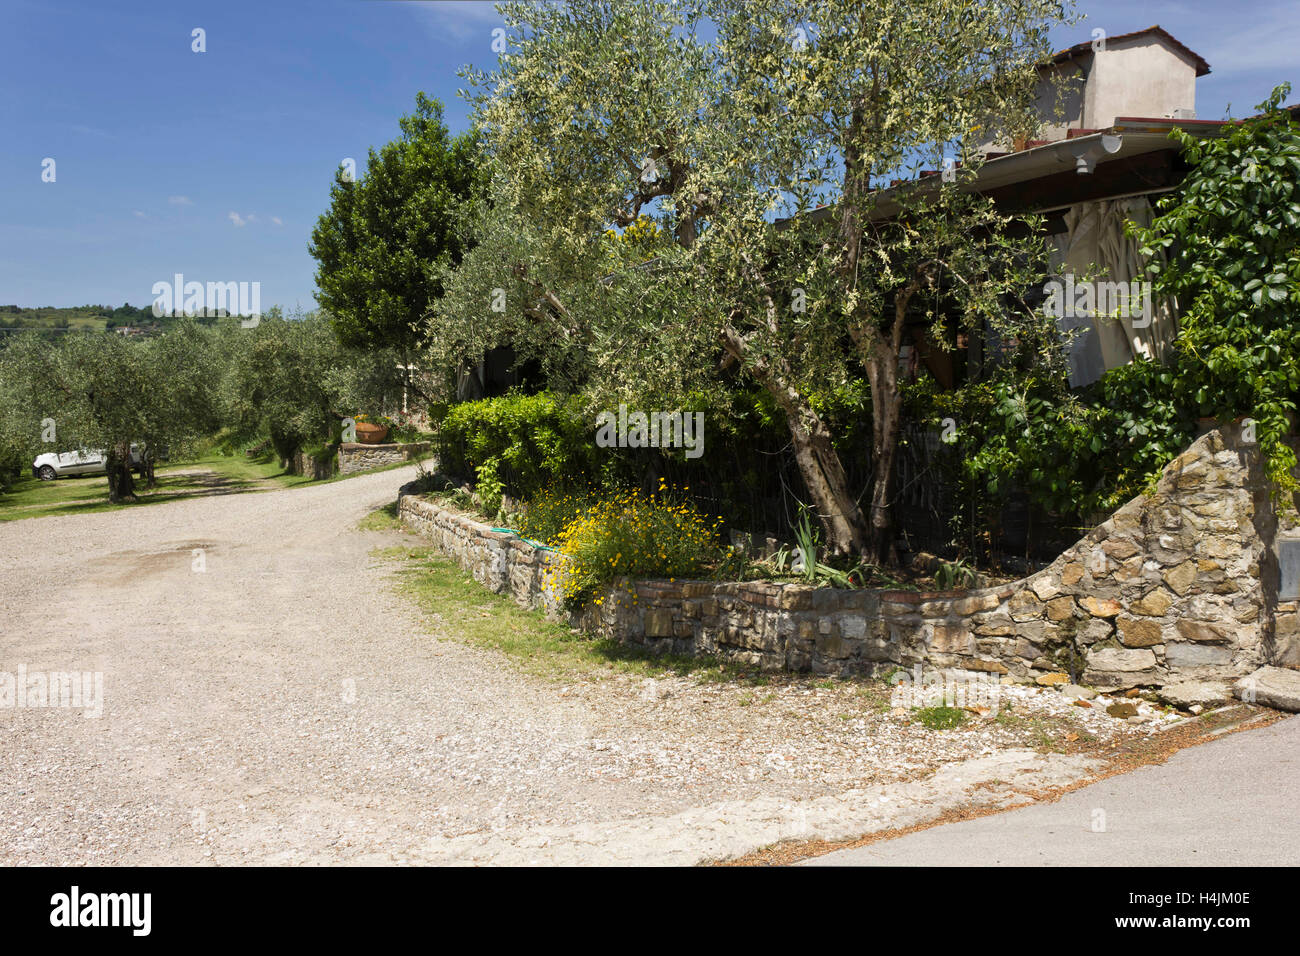 LASTRA A SIGNA, ITALY - MAY 21 2016: Outdoor view of Edy Piu Restaurant on Tuscan hills, surrounded by nature Stock Photo